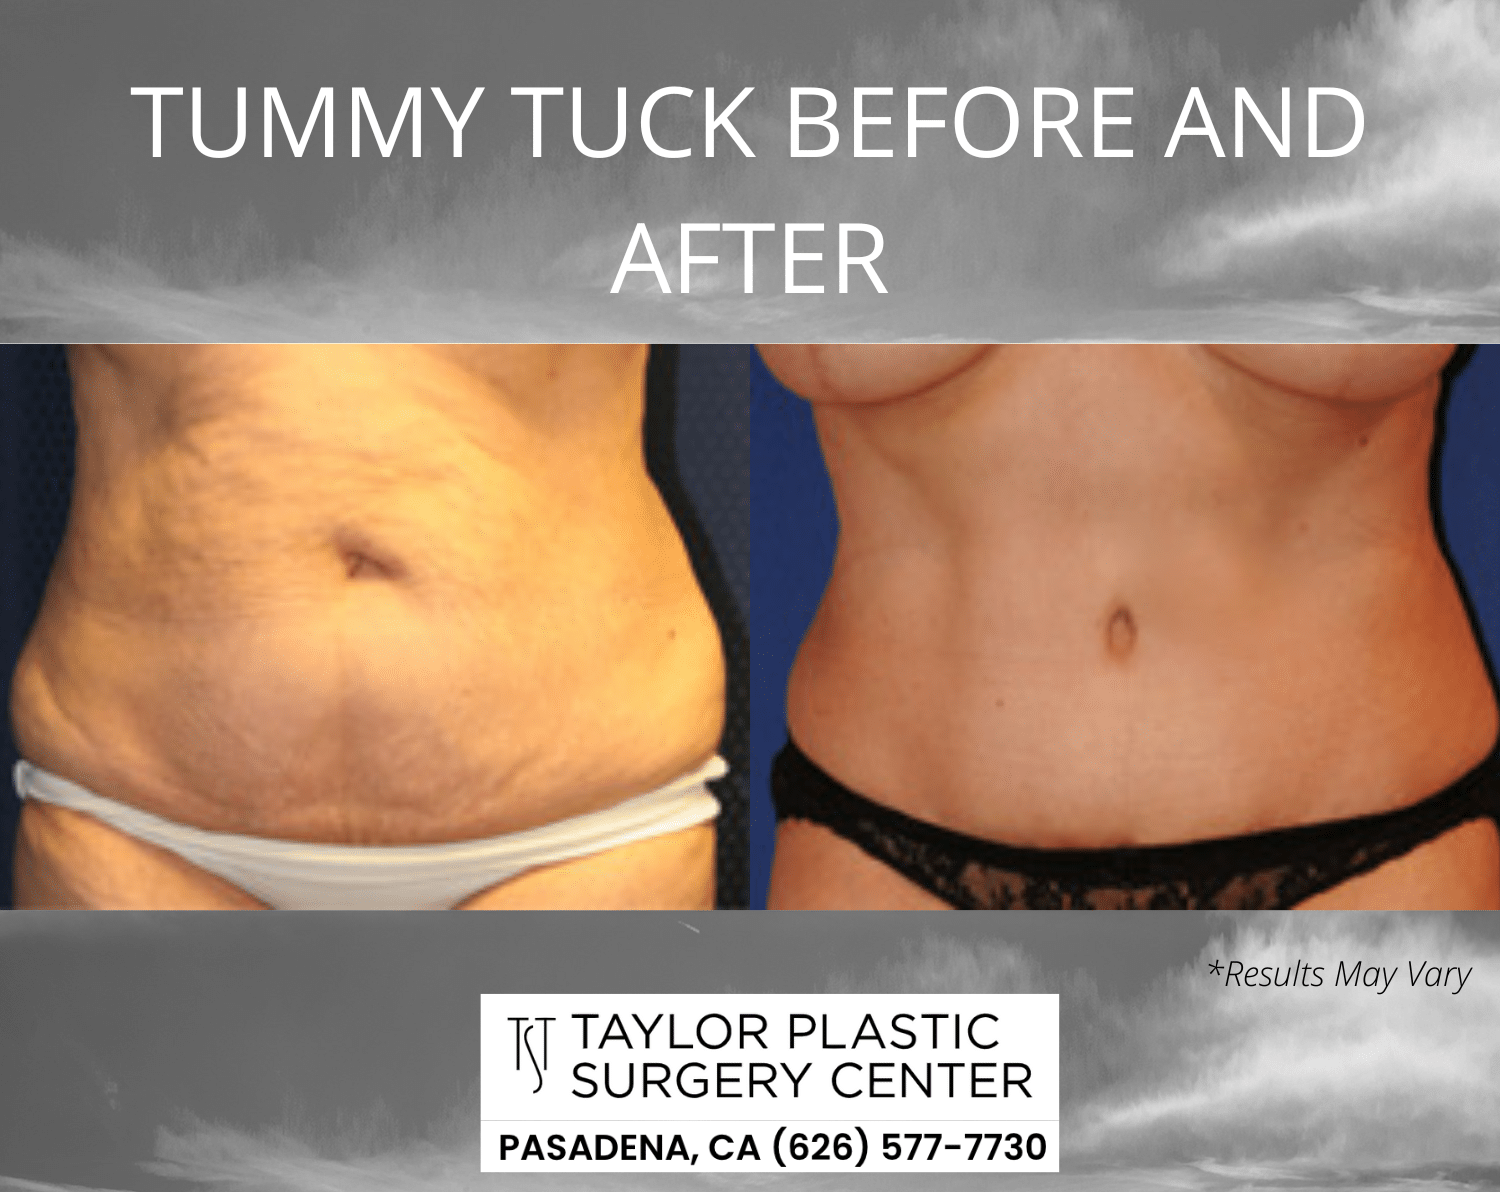 Why Should I Consider a Tummy Tuck After Pregnancy? - Thomas